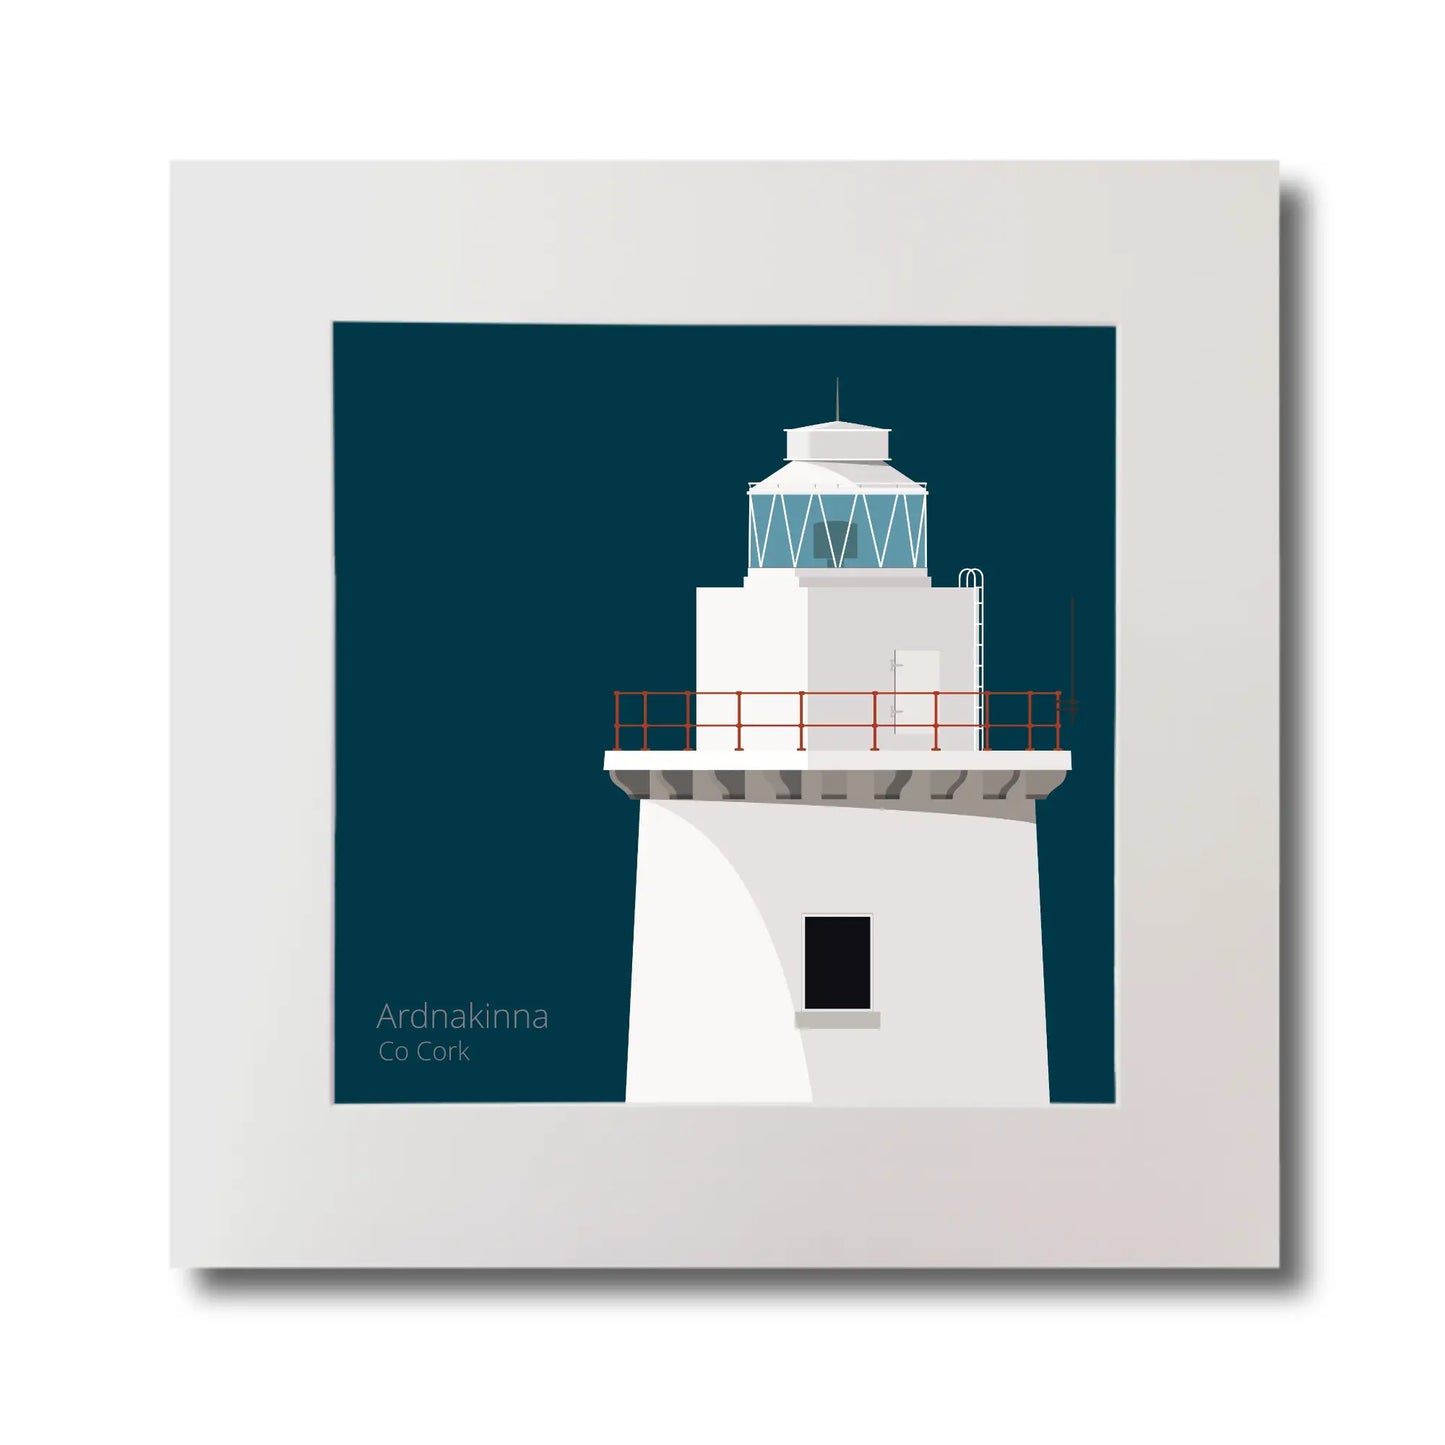 Illustration of Ardnakinna lighthouse on a midnight blue background, mounted and measuring 30x30cm.